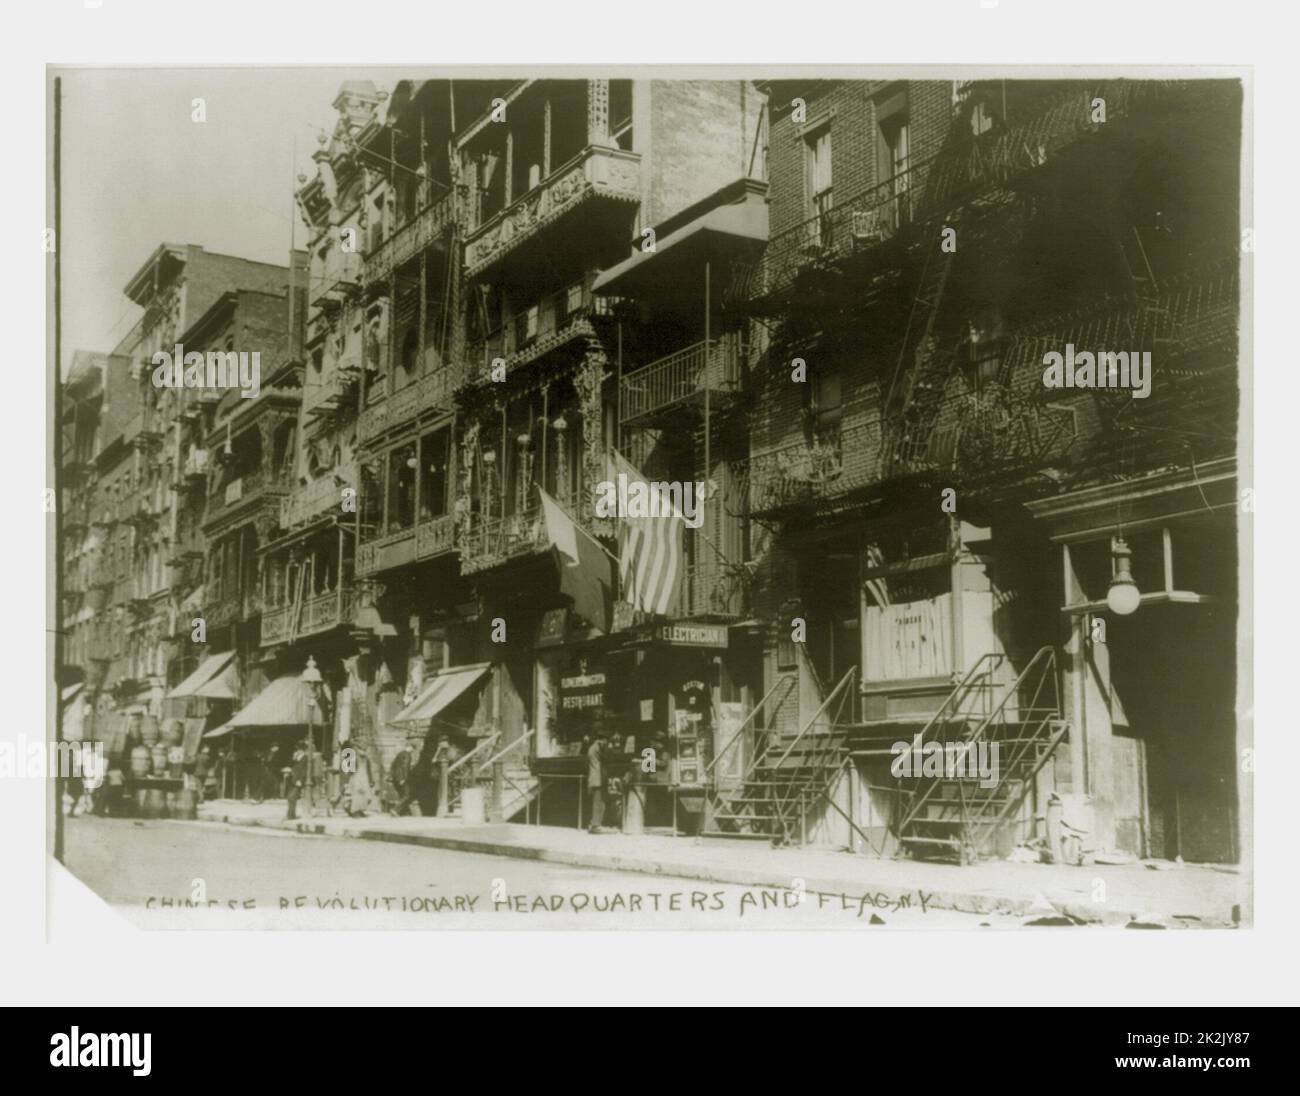 U.S. and Chinese flags hanging from Chinese revolutionary headquarters in New York city 1911. Photo shows the Young China Association headquarters on the second floor of 12 Mott Street in New York City, flying the flag of the Chinese revolutionary movement. The headquarters are above the Boston Cigar store, to the right of the Flowery Kingdom Restaurant and to the left of Morning Star Mission facilities. Stock Photo